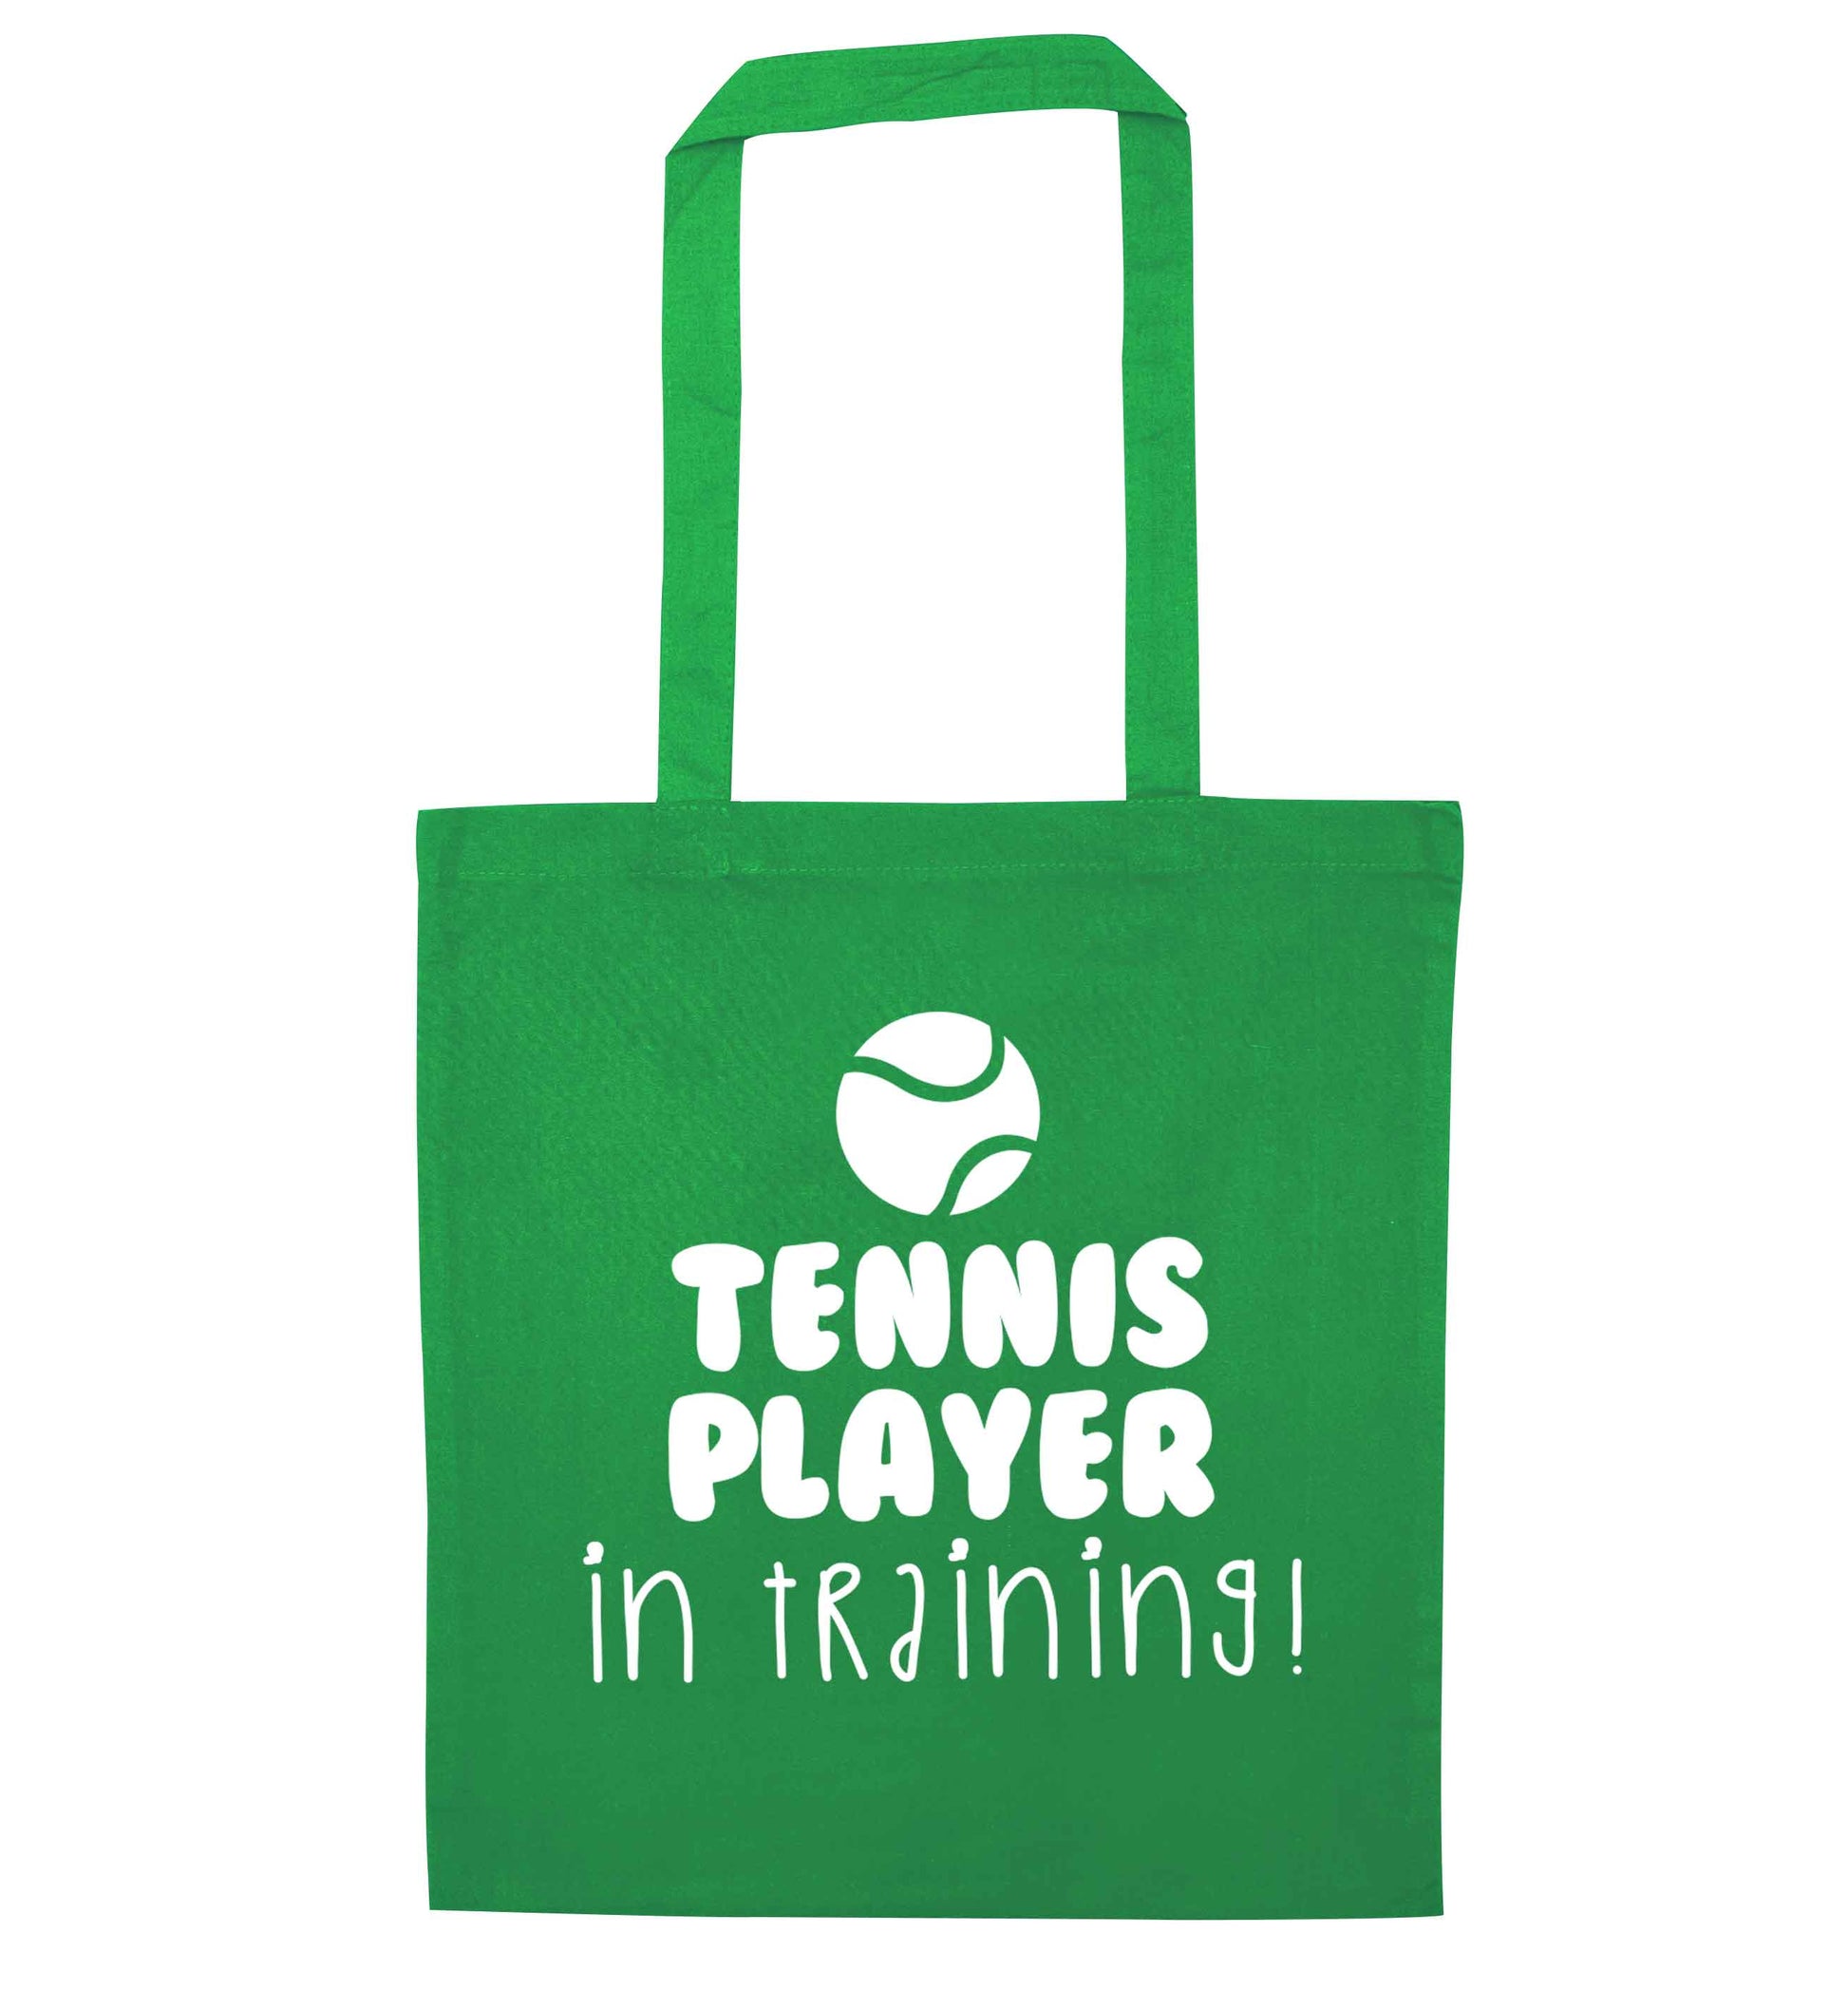 Tennis player in training green tote bag